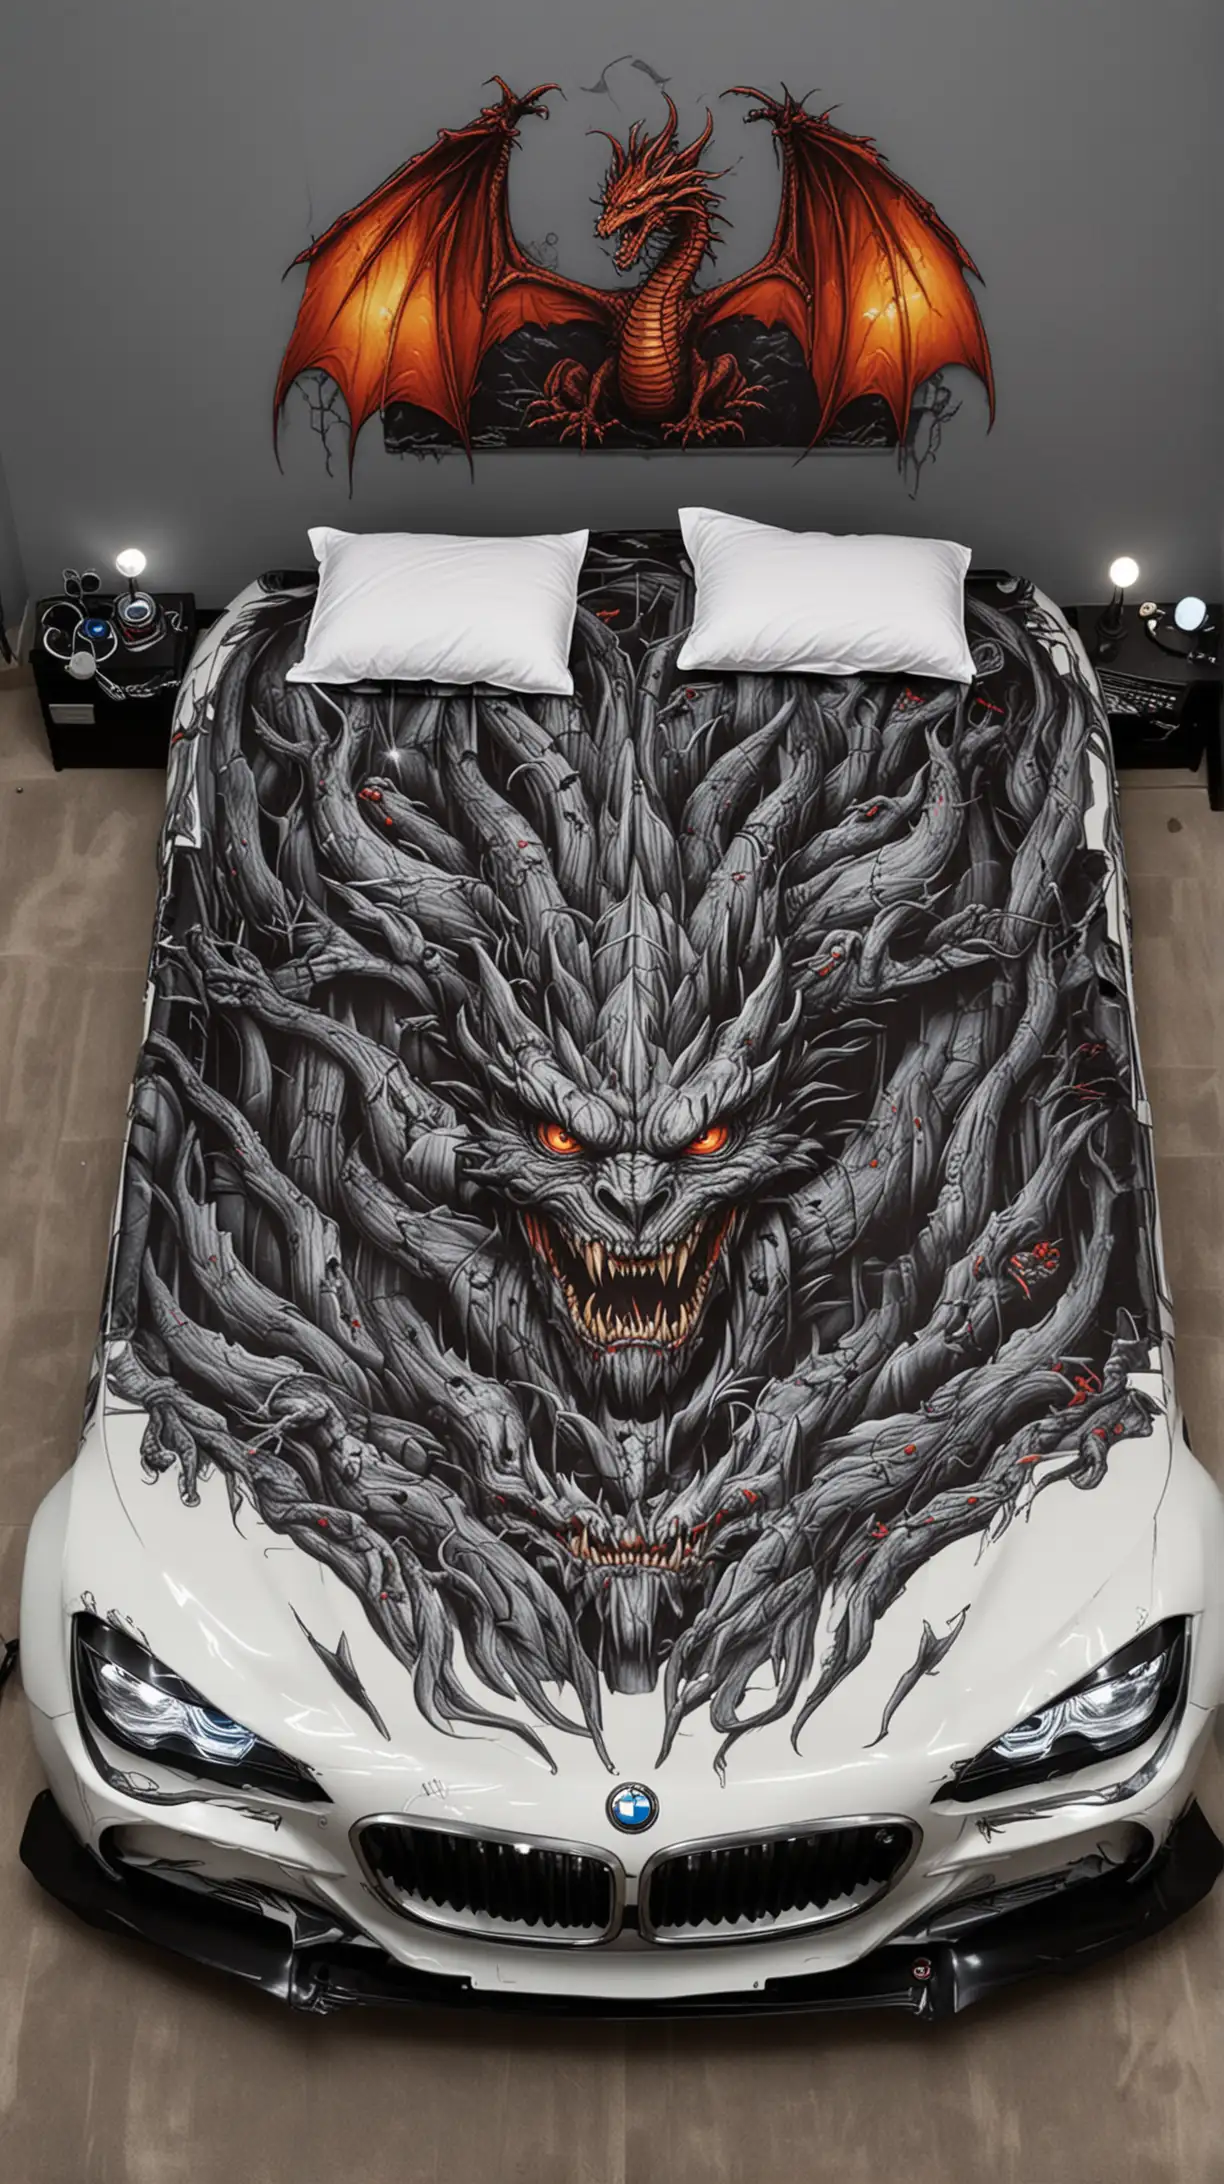 Double bed in the shape of a BMW car with headlights on and with graphics in the shape of an evil and good dragon